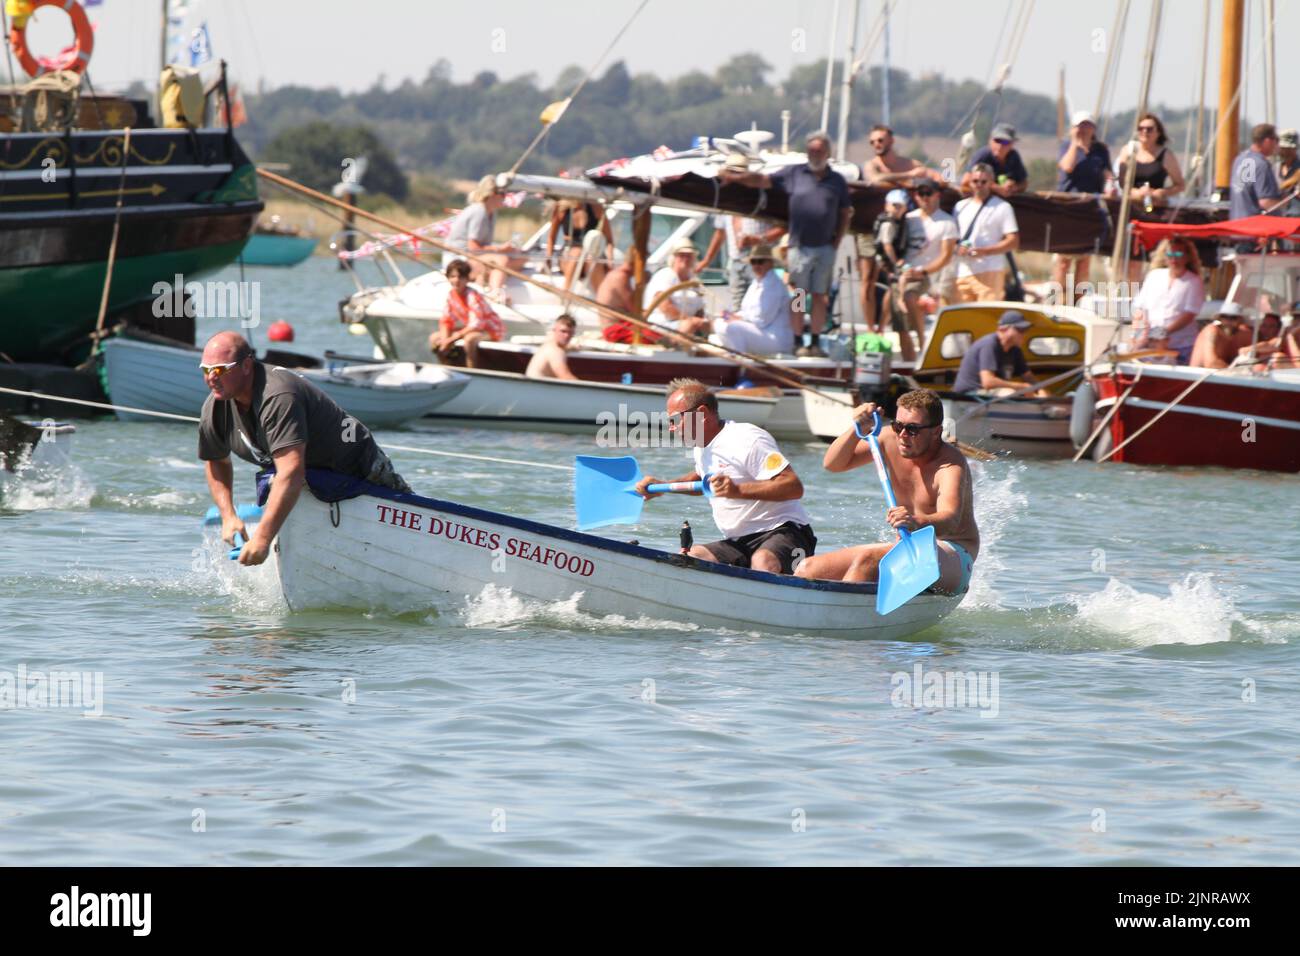 West Mersea Regatta is taking place on Mersea Island. The regatta has been run almost continually since 1838 and is organised by volunteers. The three in a boat shovel race. Stock Photo